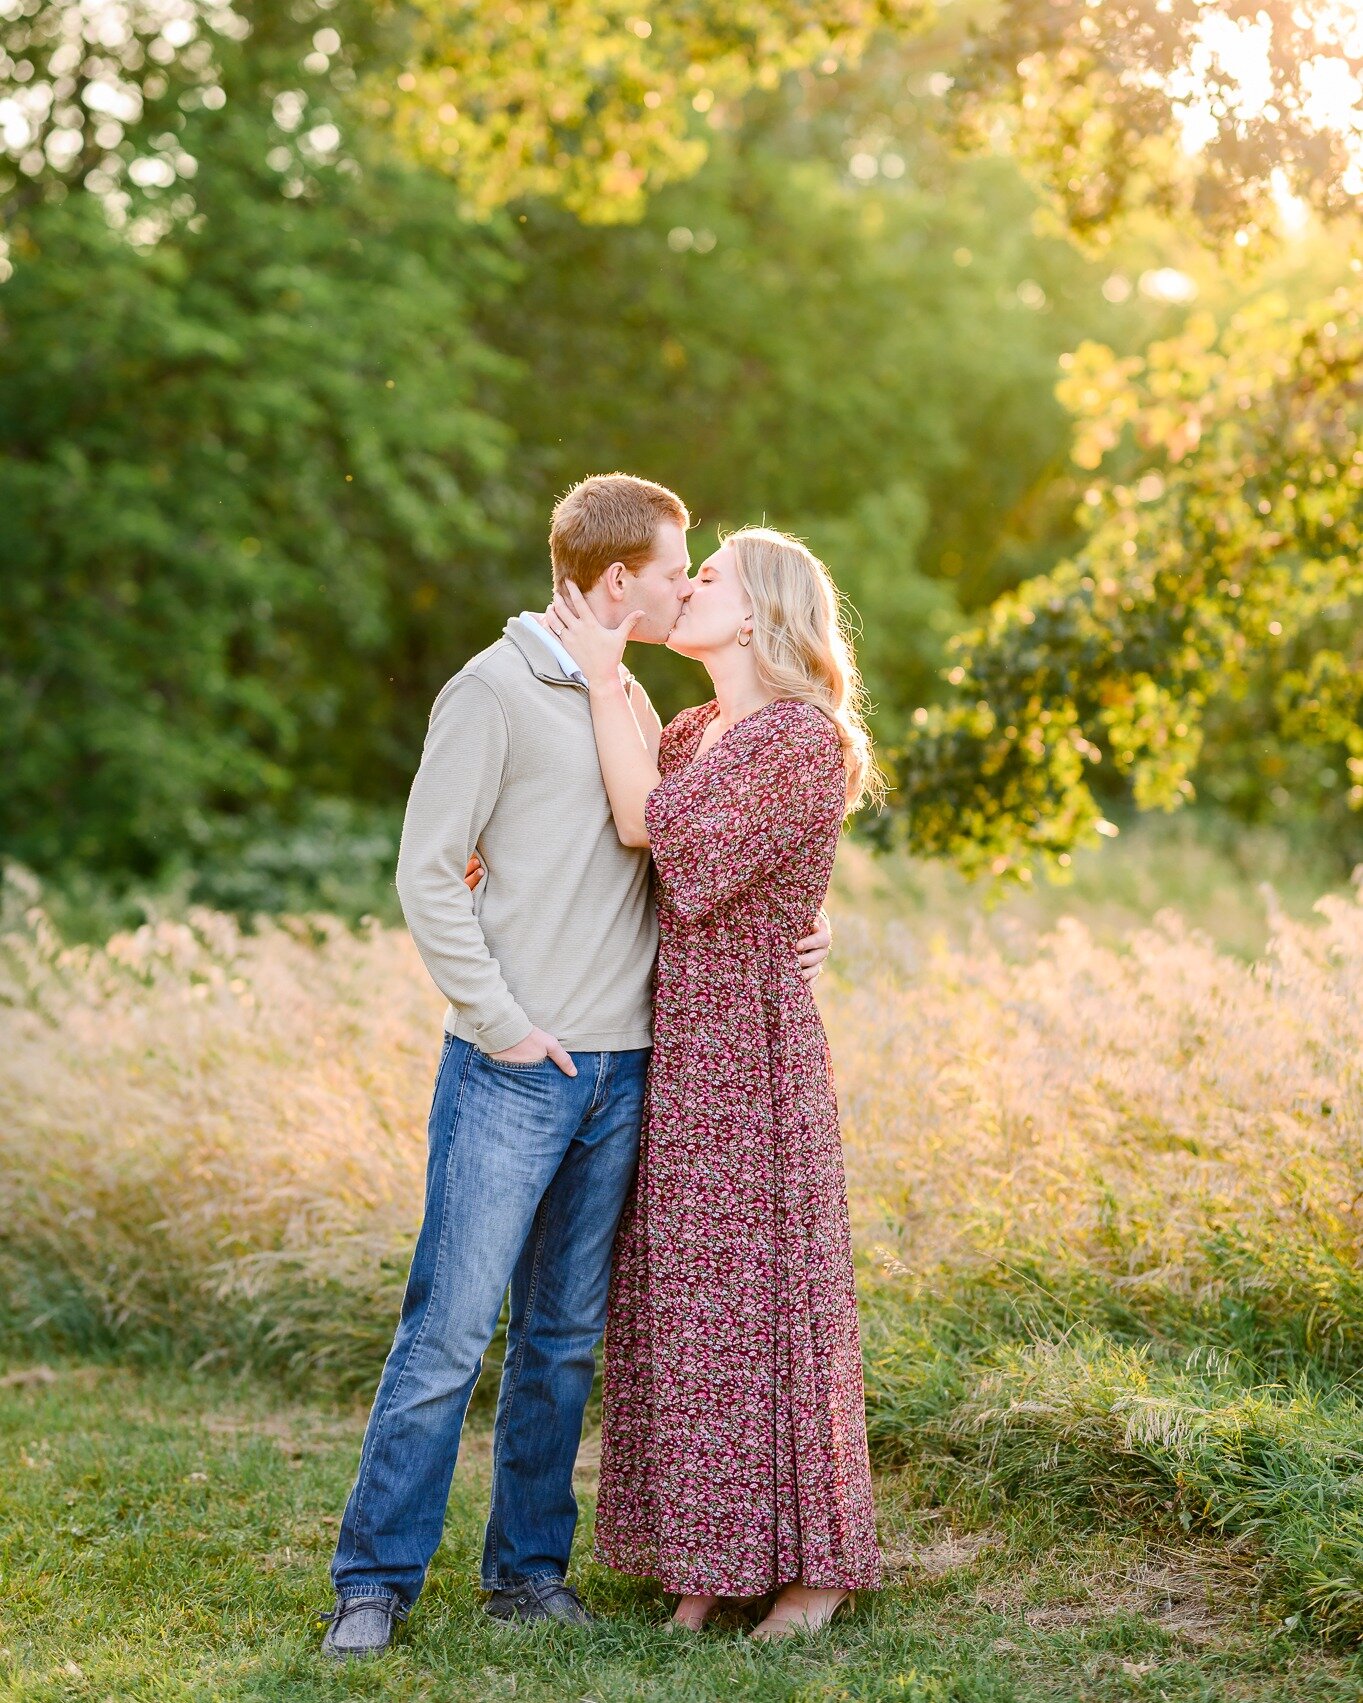 Happy wedding day to Olivia &amp; Reilly! So excited to spend the day with you two at Rustic Oaks!